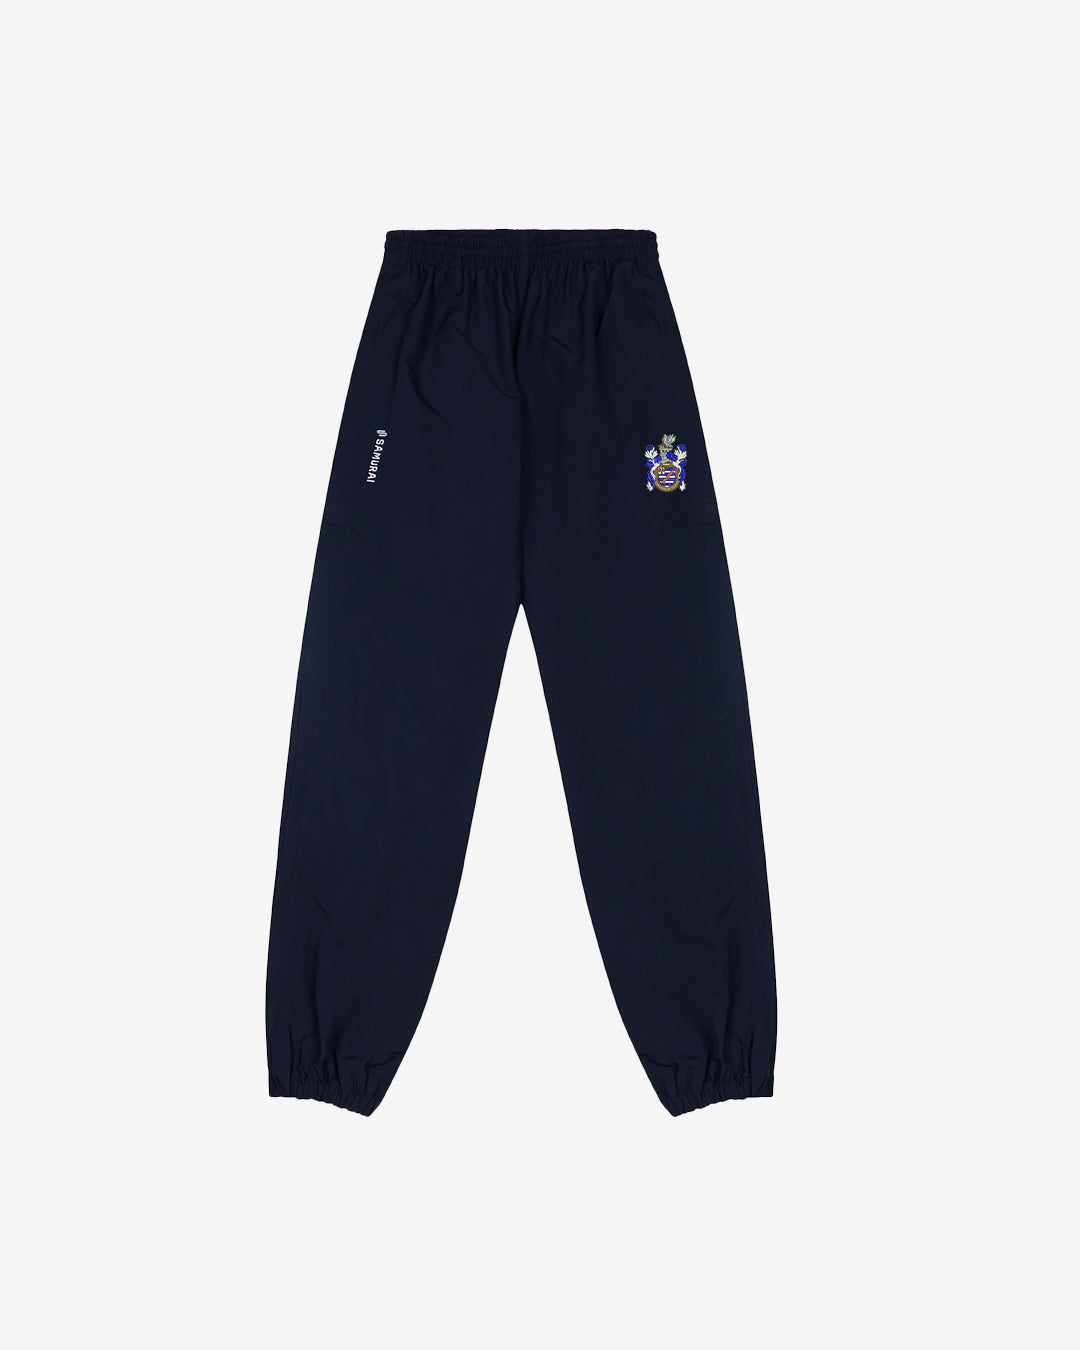 Skegness Rugby Club - EP:0104 - Southland Track Pant 2.0 - Navy